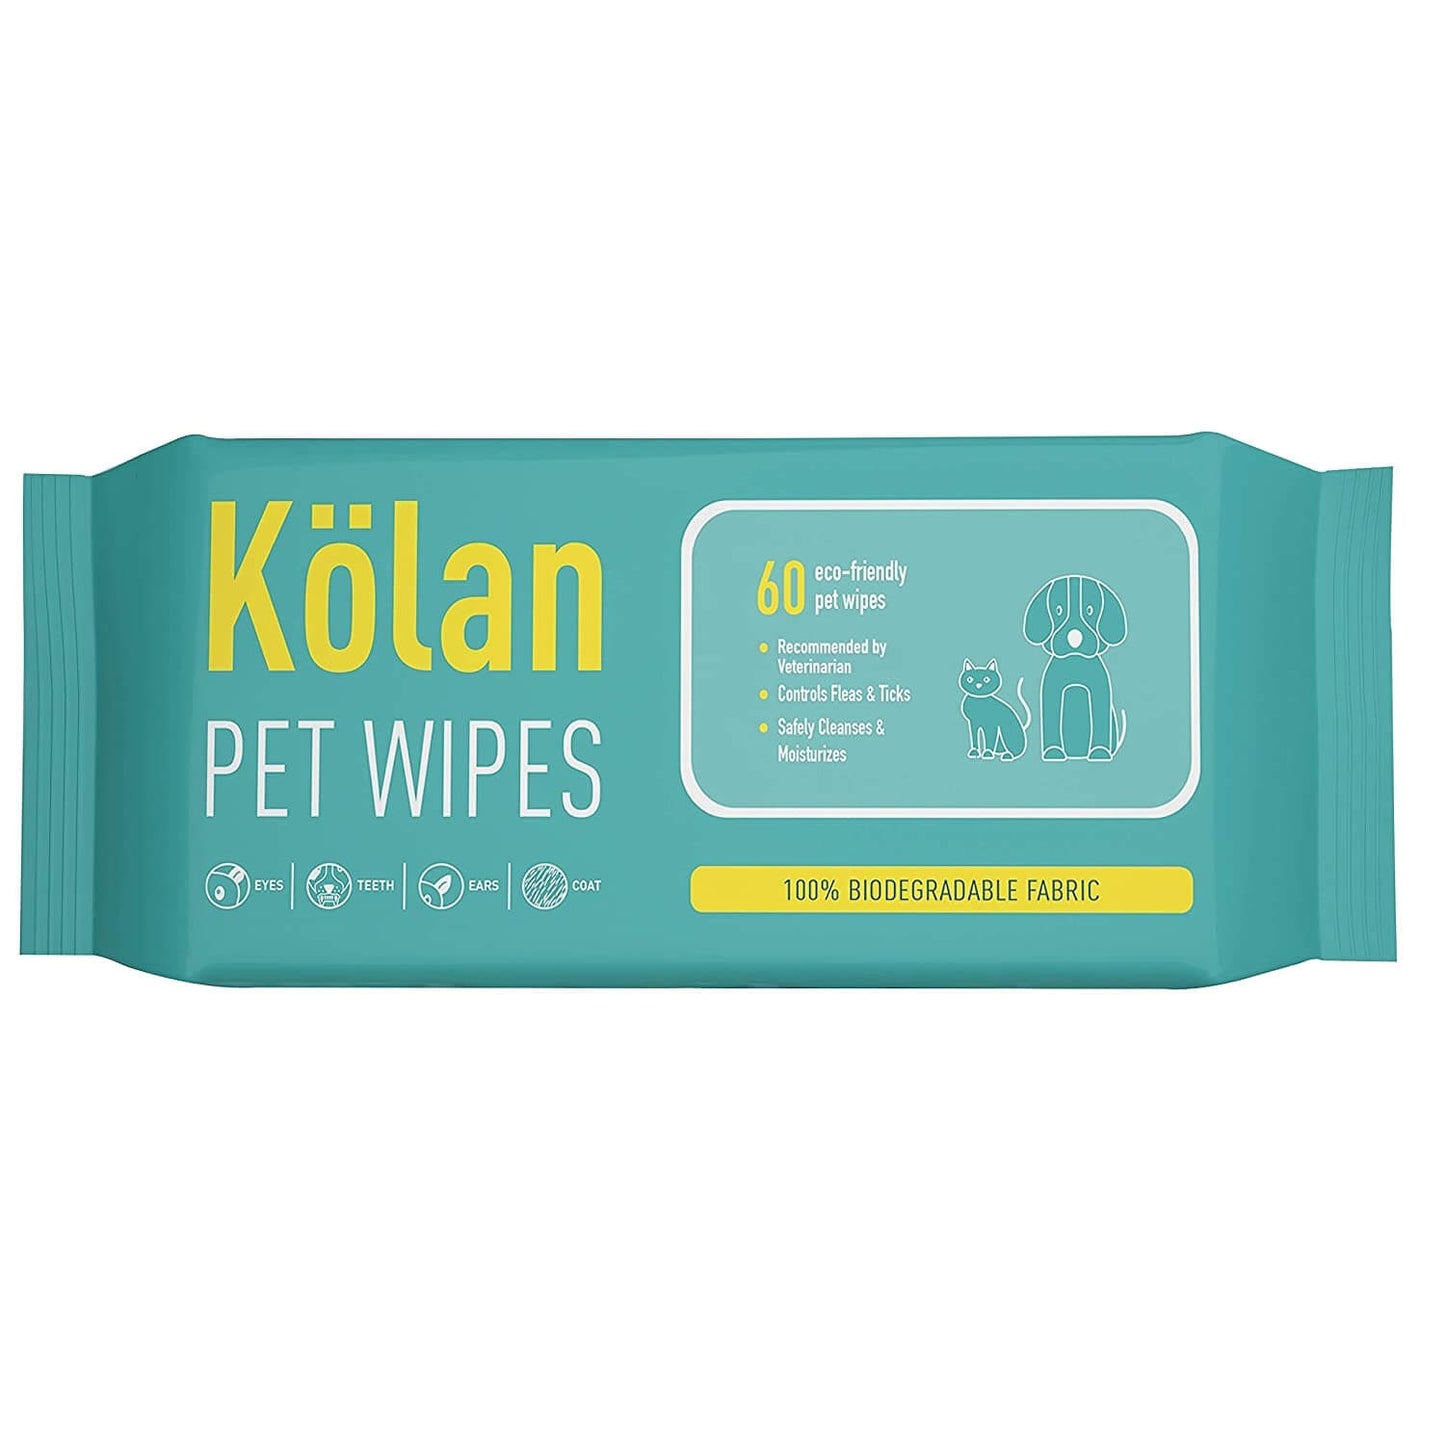 Kolan Eco-Friendly Pet Wipes/Grooming Wipes for Dogs, Cats and Other Pets 60 Pcs/Pack (Pack of 4)